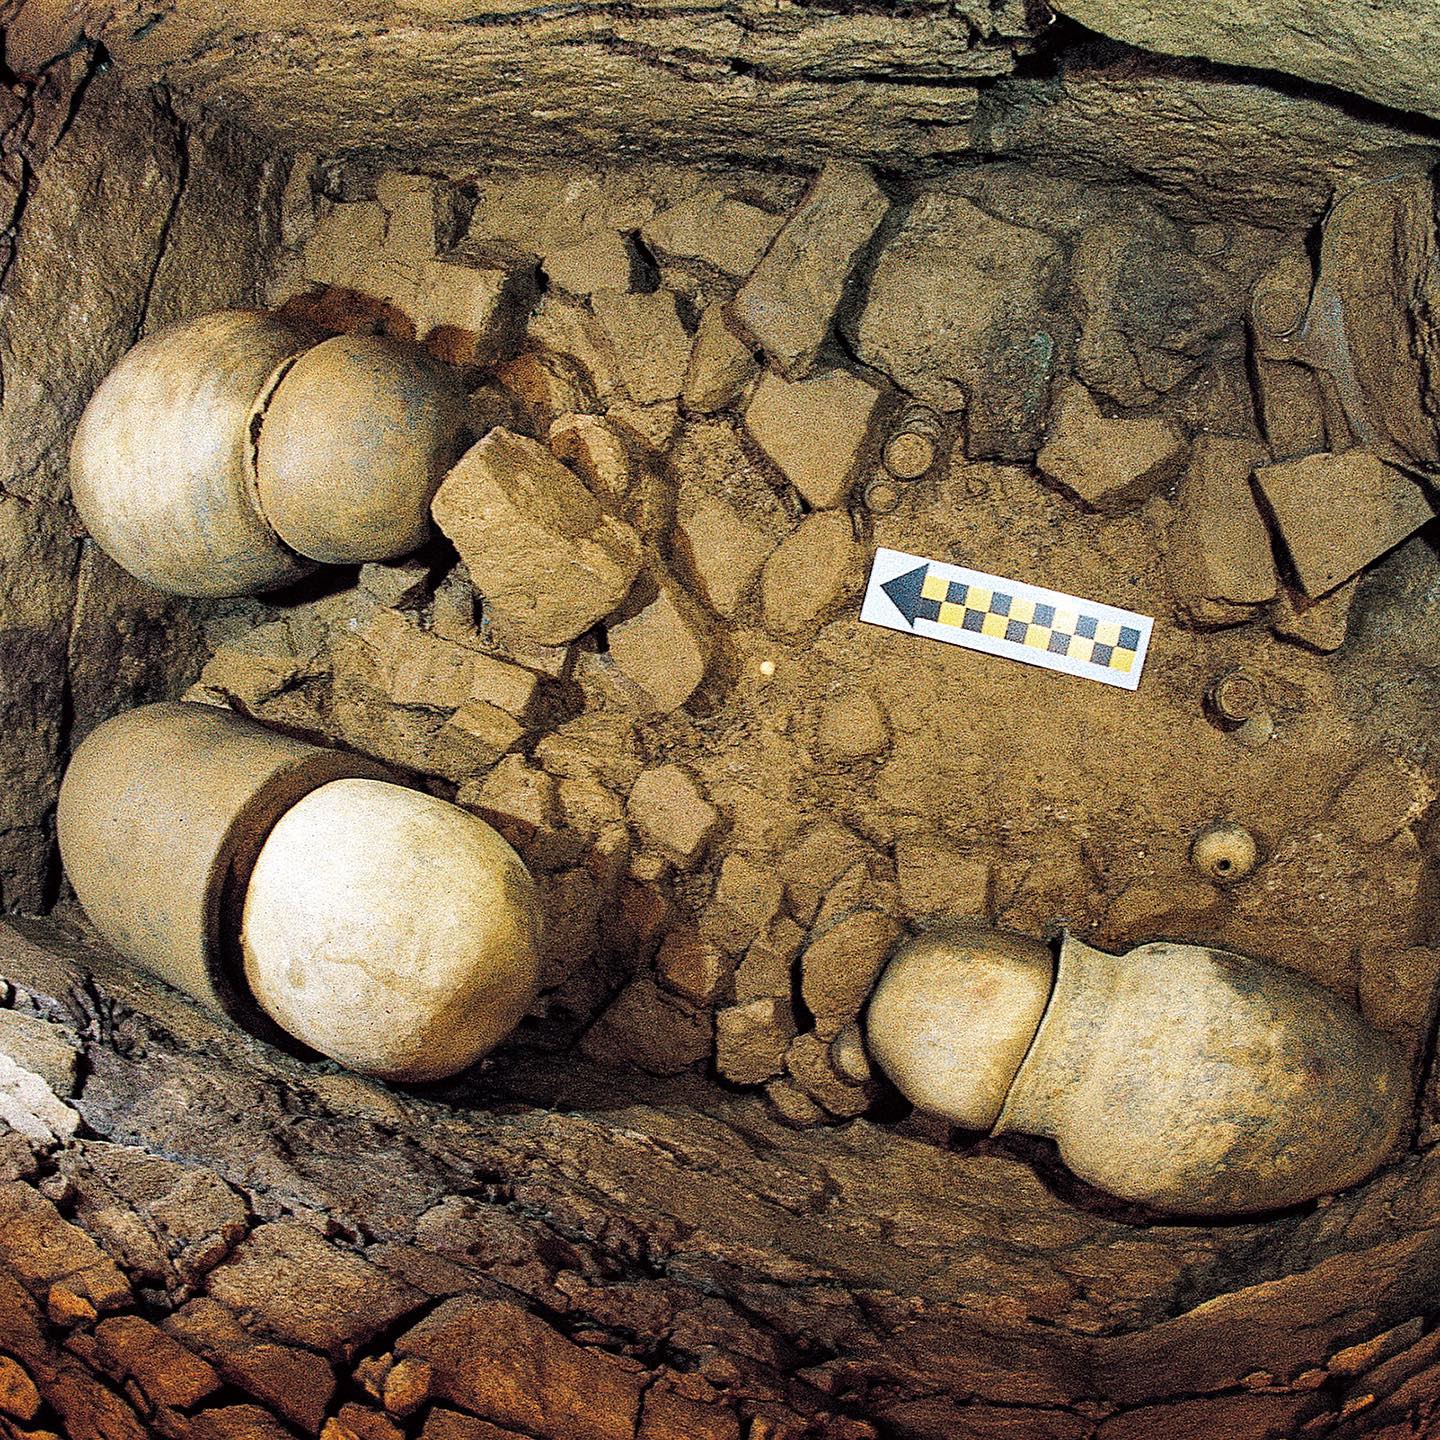 Research project to restore the technology of ancient big jar coffins

96 stone chamber of Naju Bogam-ri tomb no.3

#korea #nrich #koreanheritage #kheritage #koreatreasure #korearesesarch #heritagekr #kculture

Copyright 2022. NRICH all rights reserved.